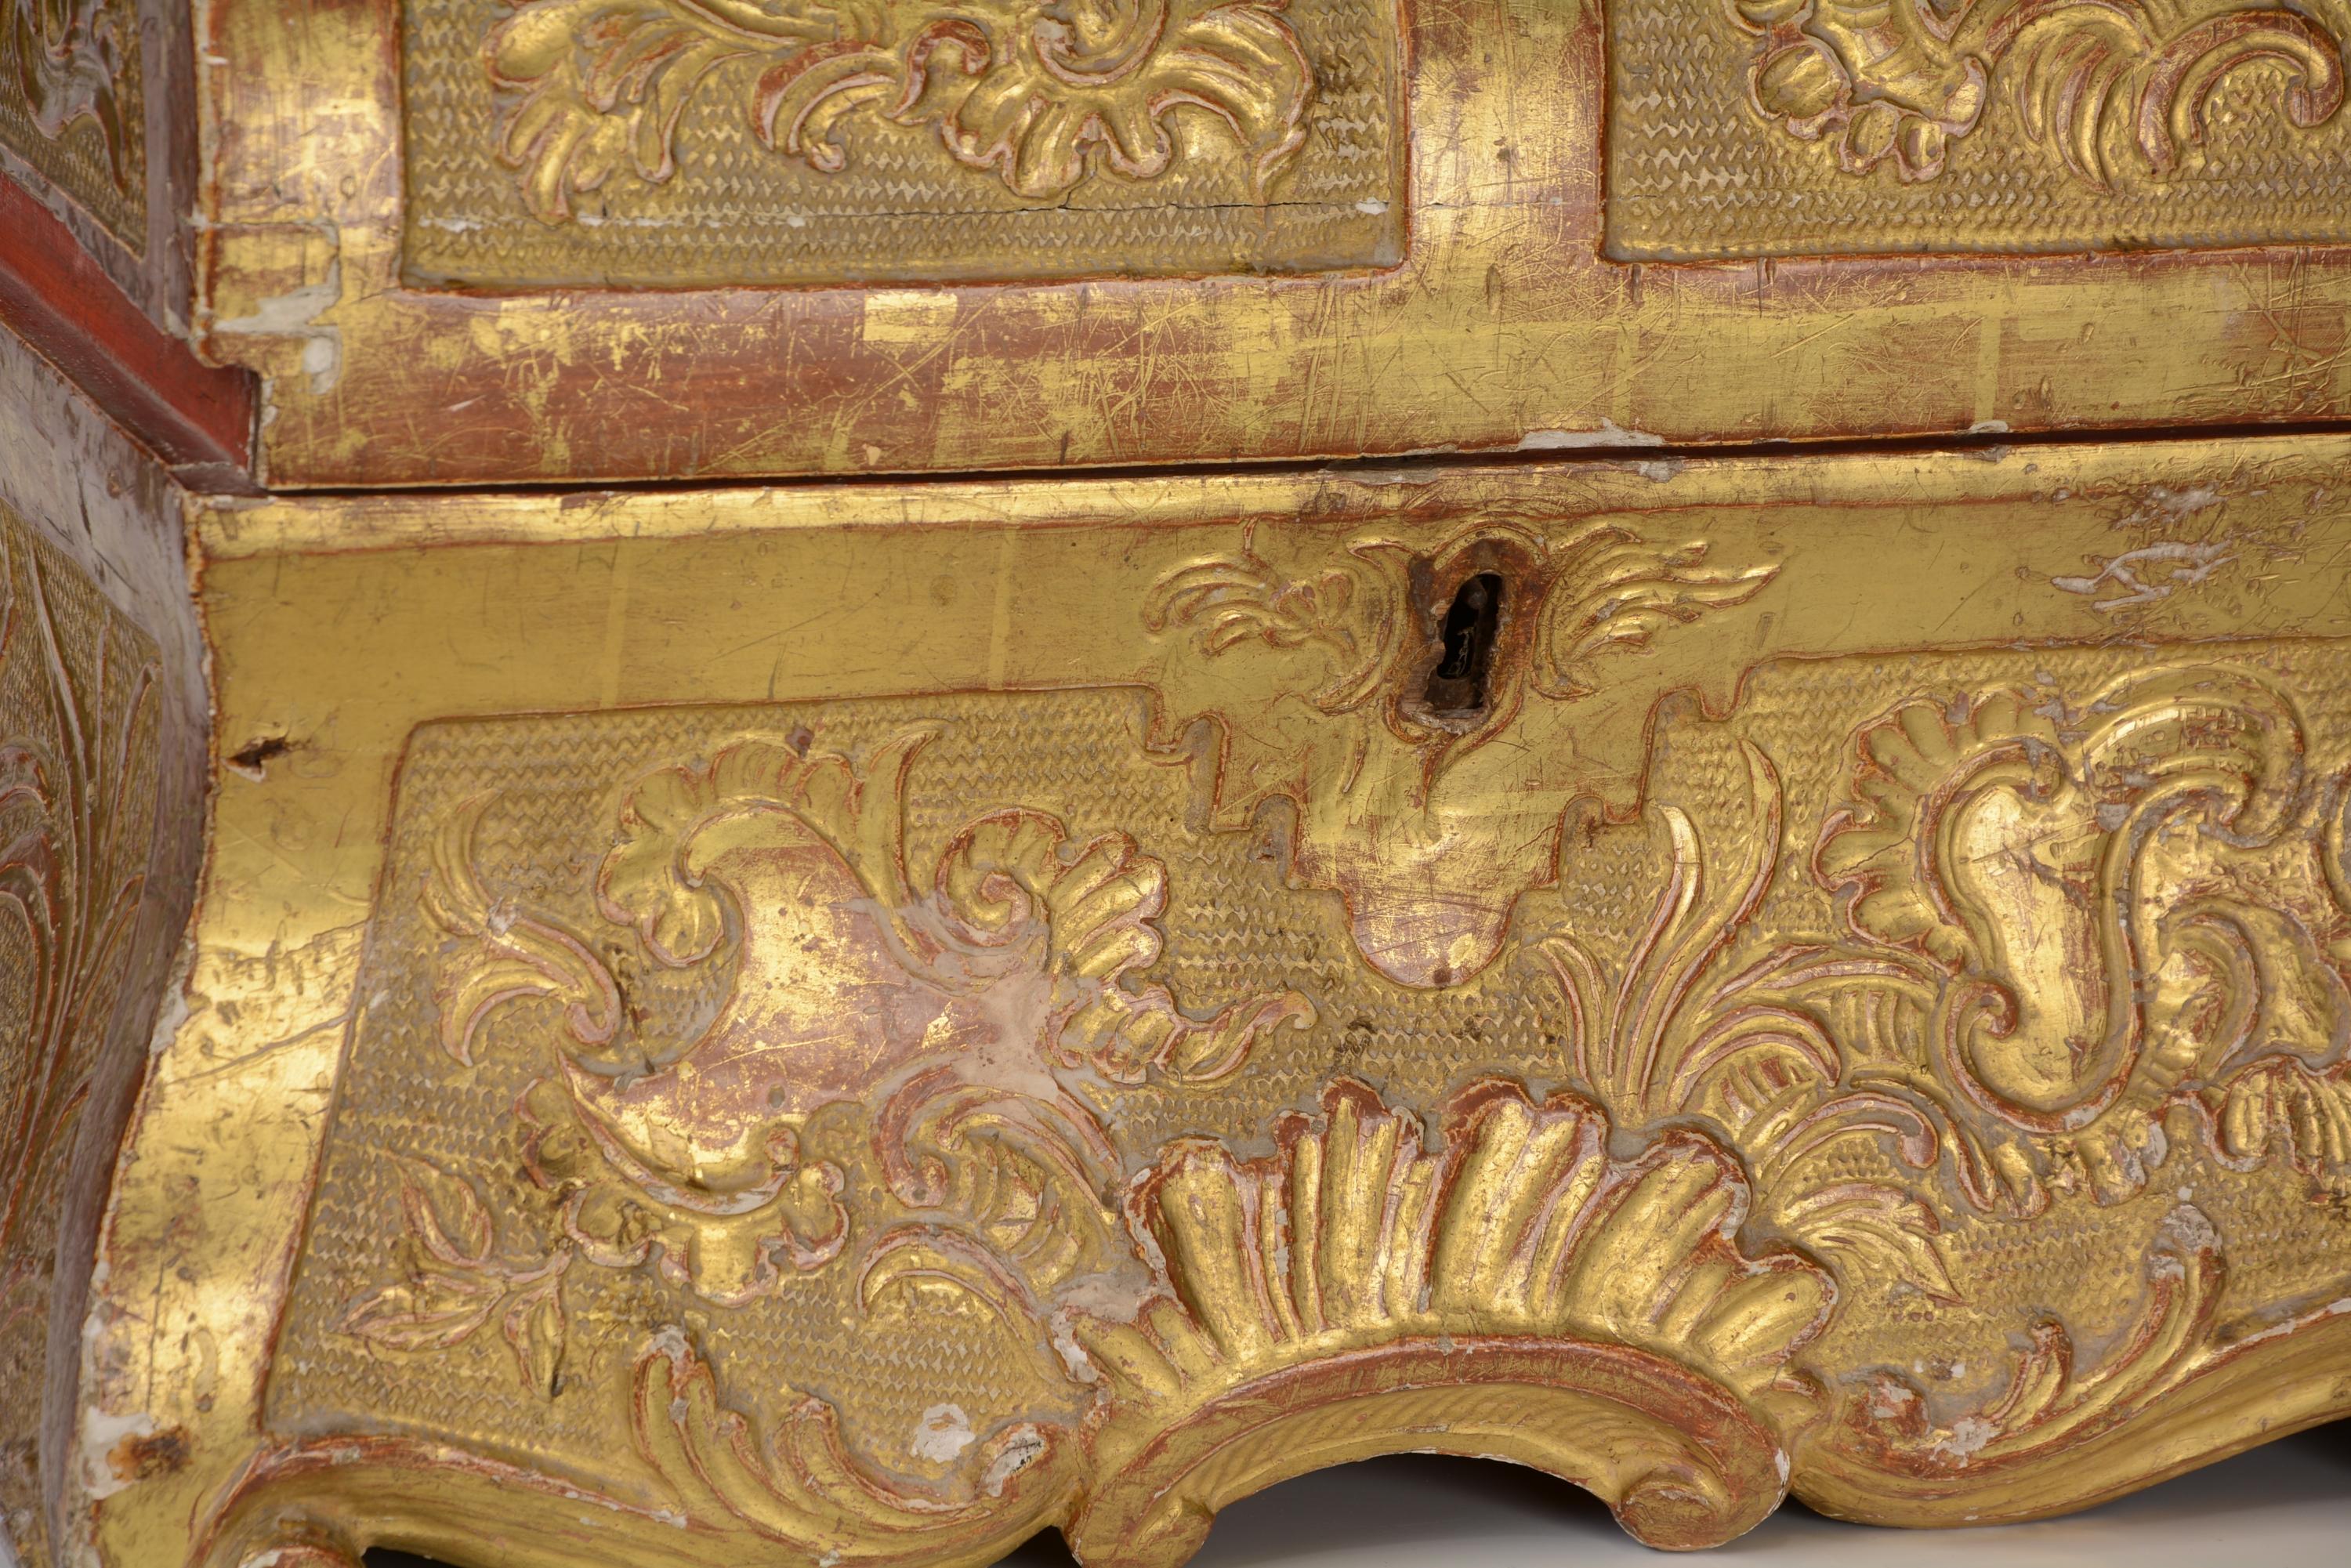 18th century chest. Carved and gilded wood.
18th century vault with a still Baroque structure, with a wavy profile, with bulges in elevation, but already decorated with Rococo details, organized even in an asymmetrical composition unthinkable in the